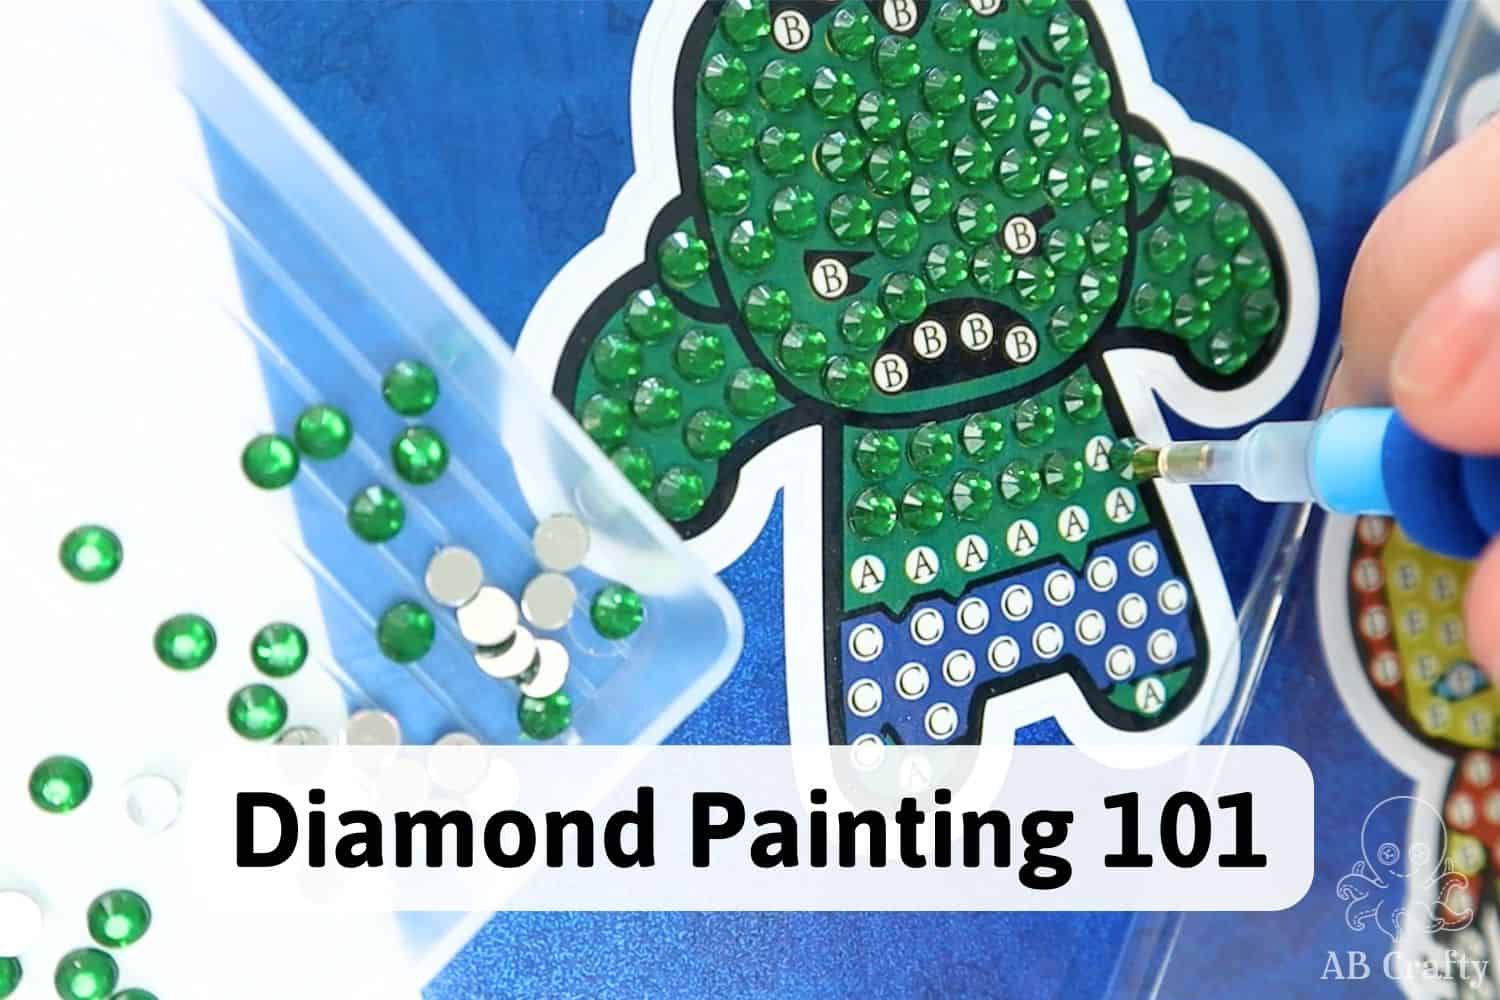 The Best Craft Tables For Diamond Painting - Diamond Painting Guide